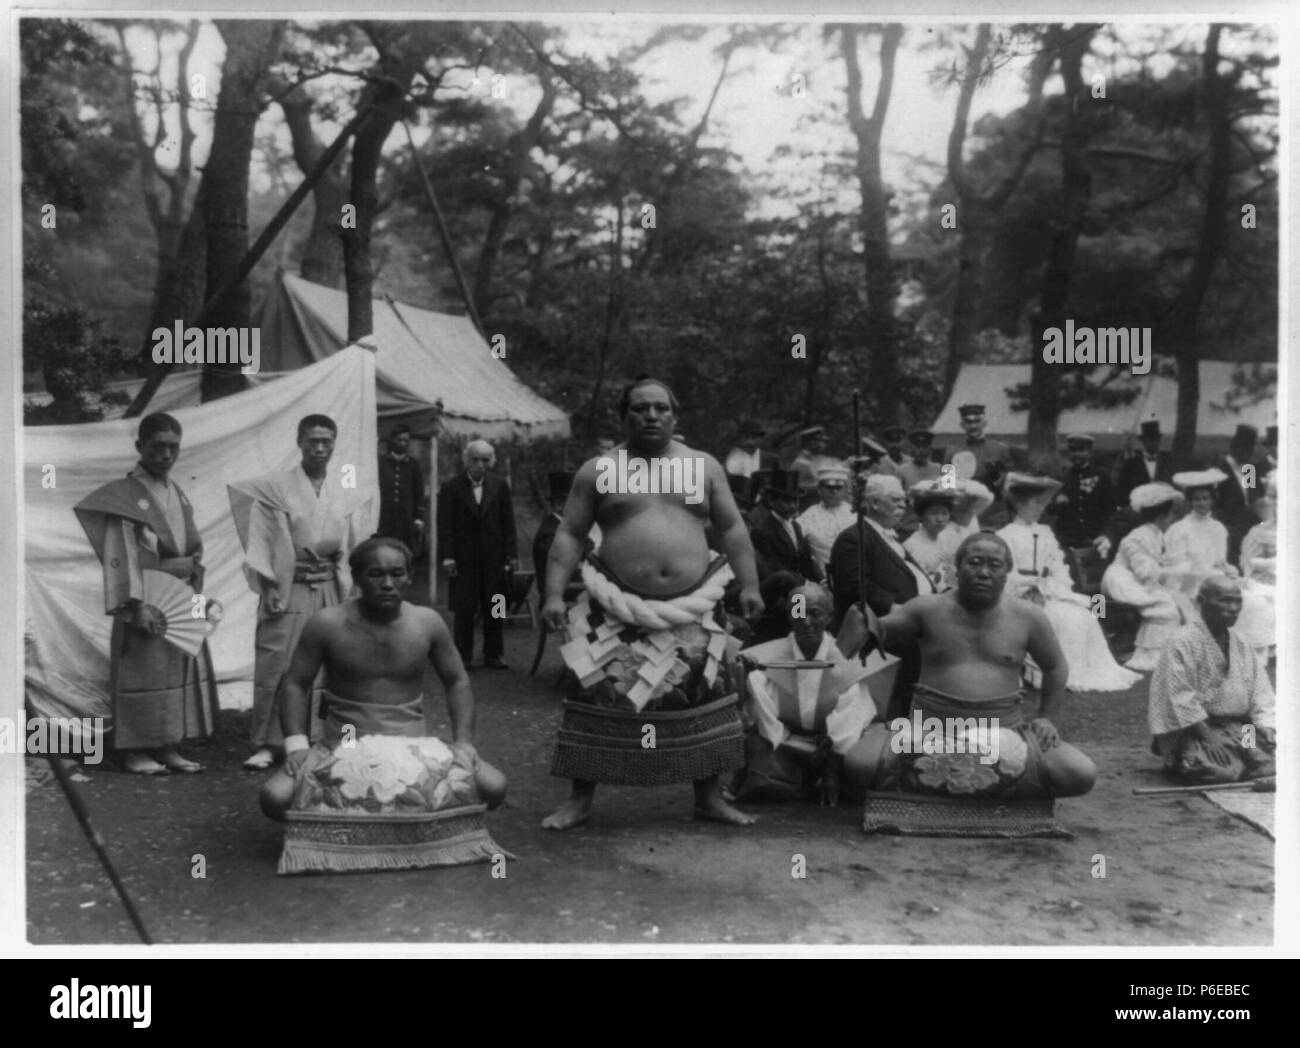 English: Three sumo wrestlers posed outdoors with spectators in background, probably in Japan, in approximately 1905. The middle wrestler Hitachiyama wears the distinctive belt indicating yokuzuna rank. circa 1905 75 Sumo wresters (1905) Stock Photo